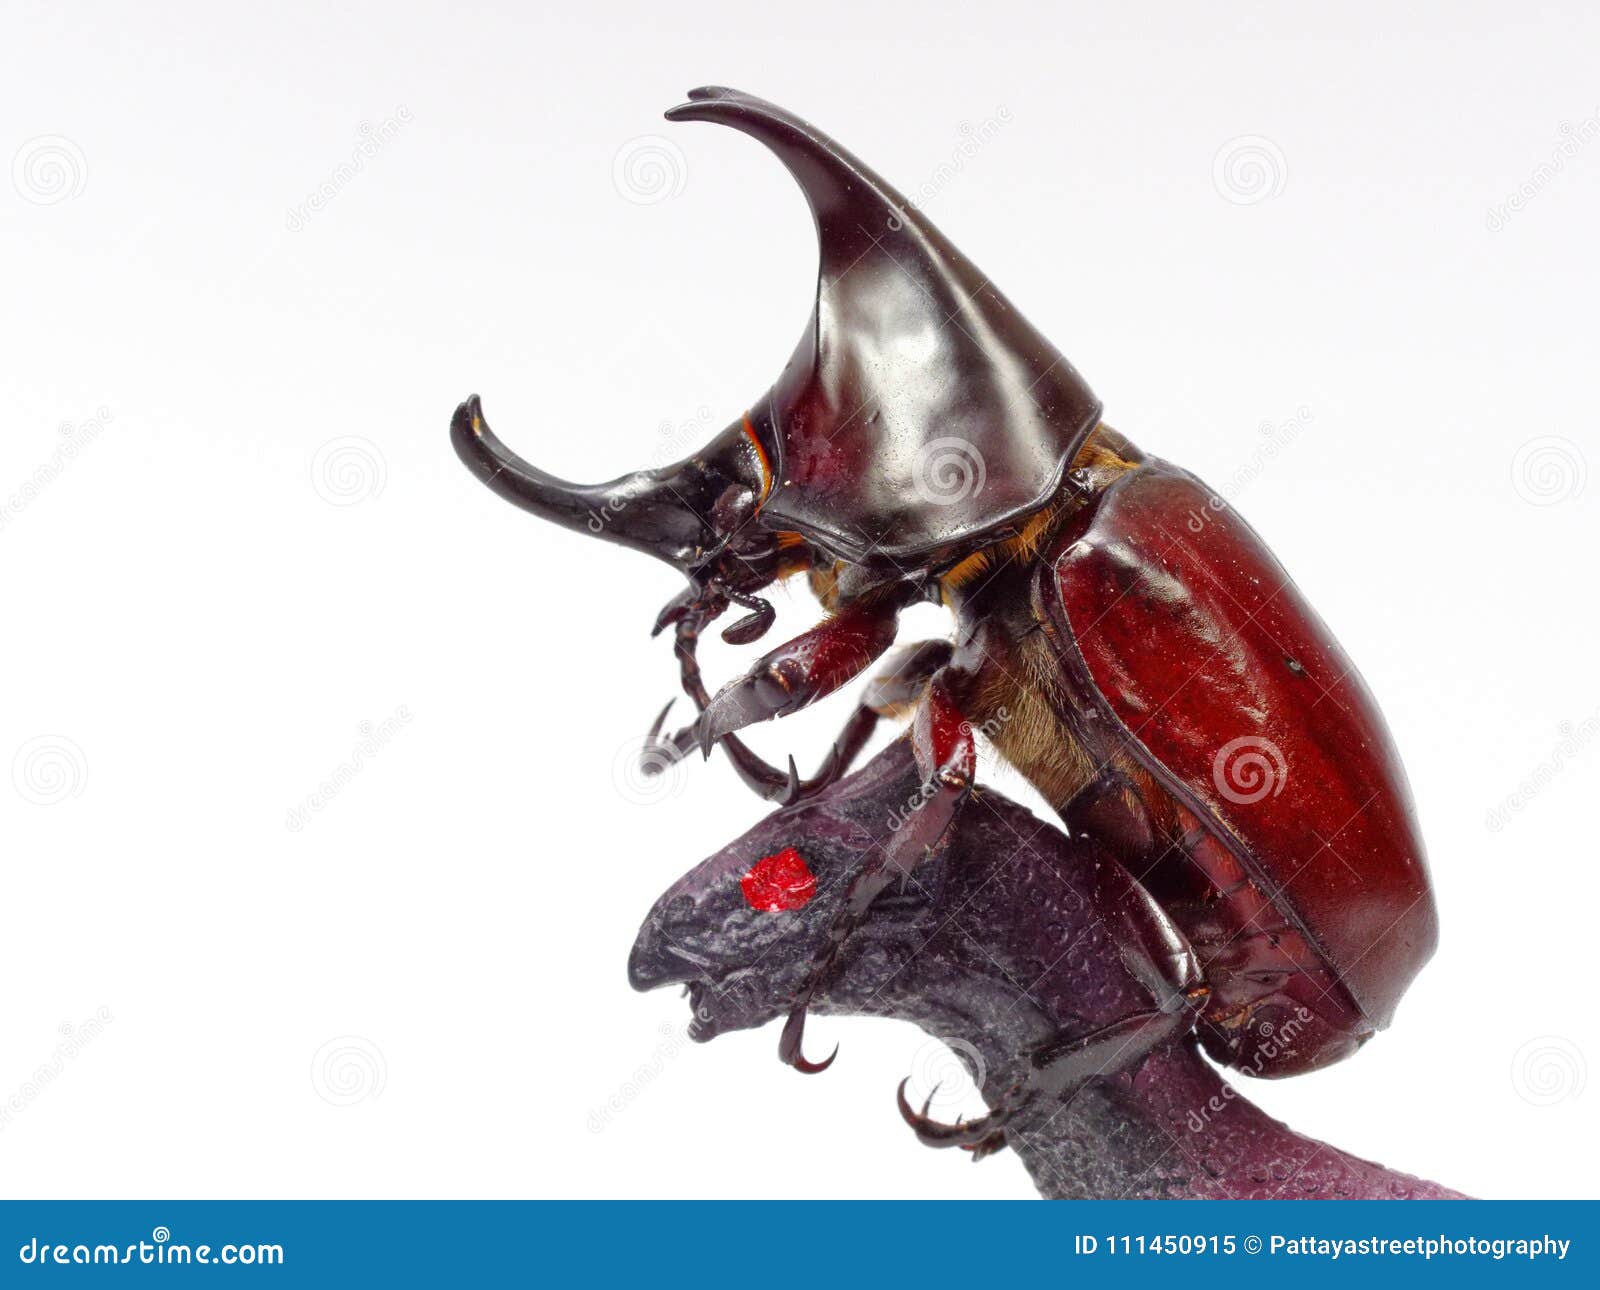 fighting or rhinoceros beetle fighting with black toy dinosaur  on white background